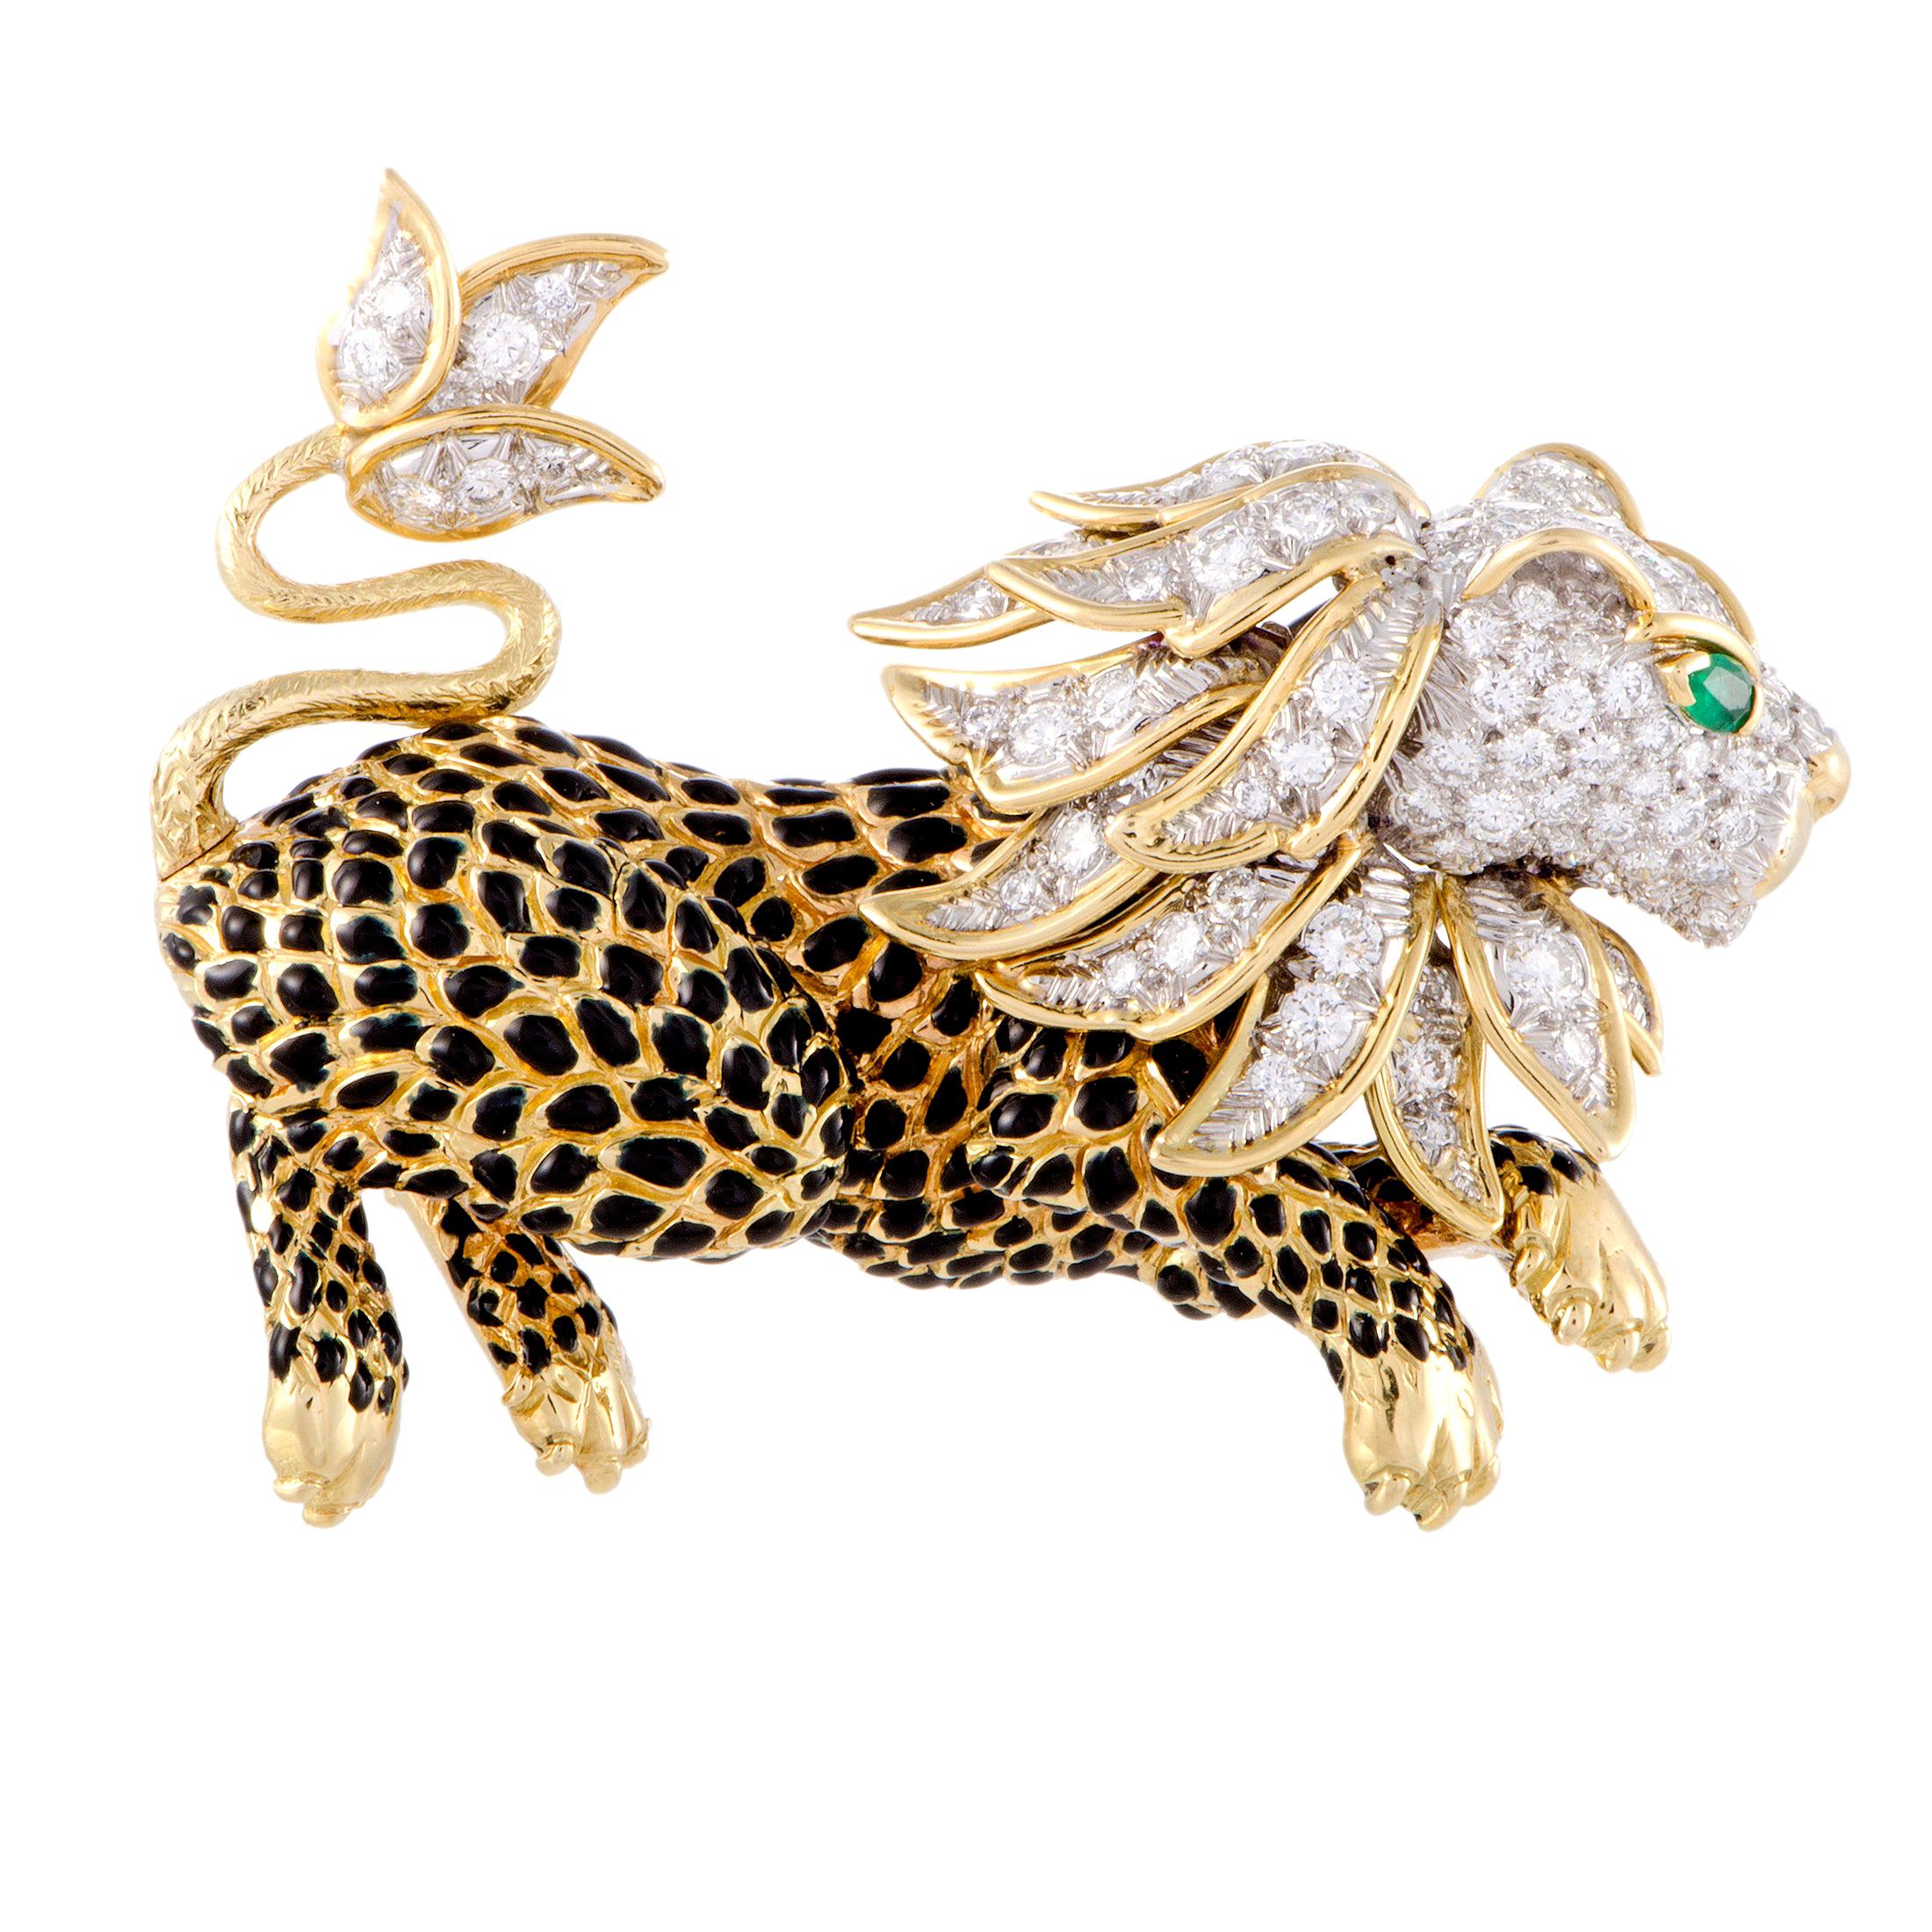 David Webb Diamond Pave and Emerald 18K Yellow and White Gold Leapon Brooch